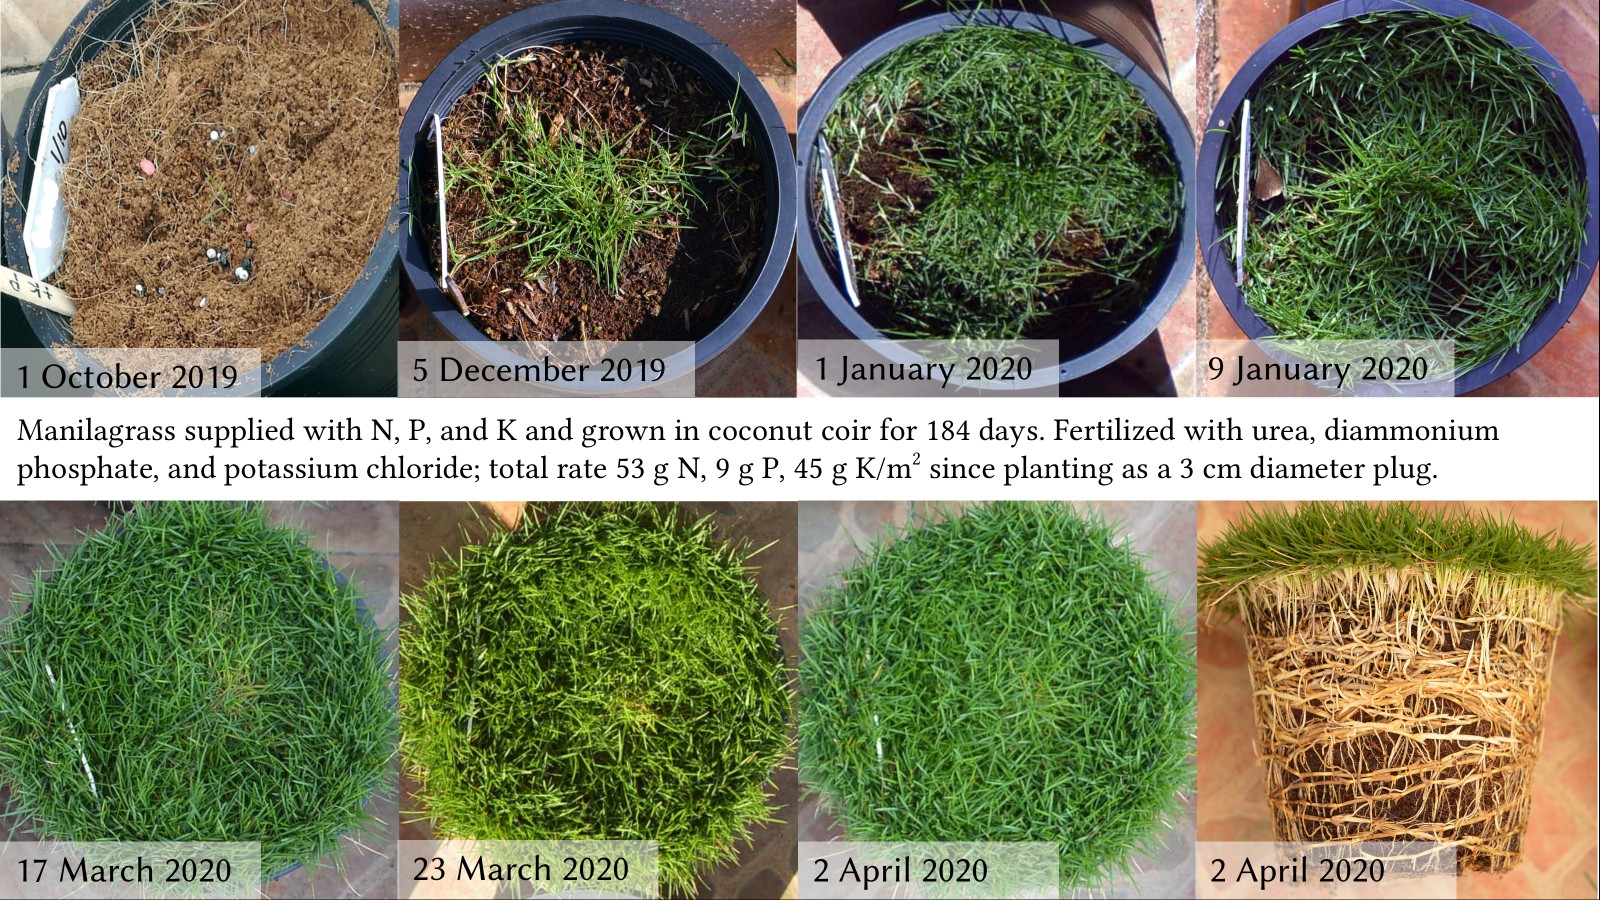 sequence of photos showing greens-type manilagrass fertilized with N, P, and K